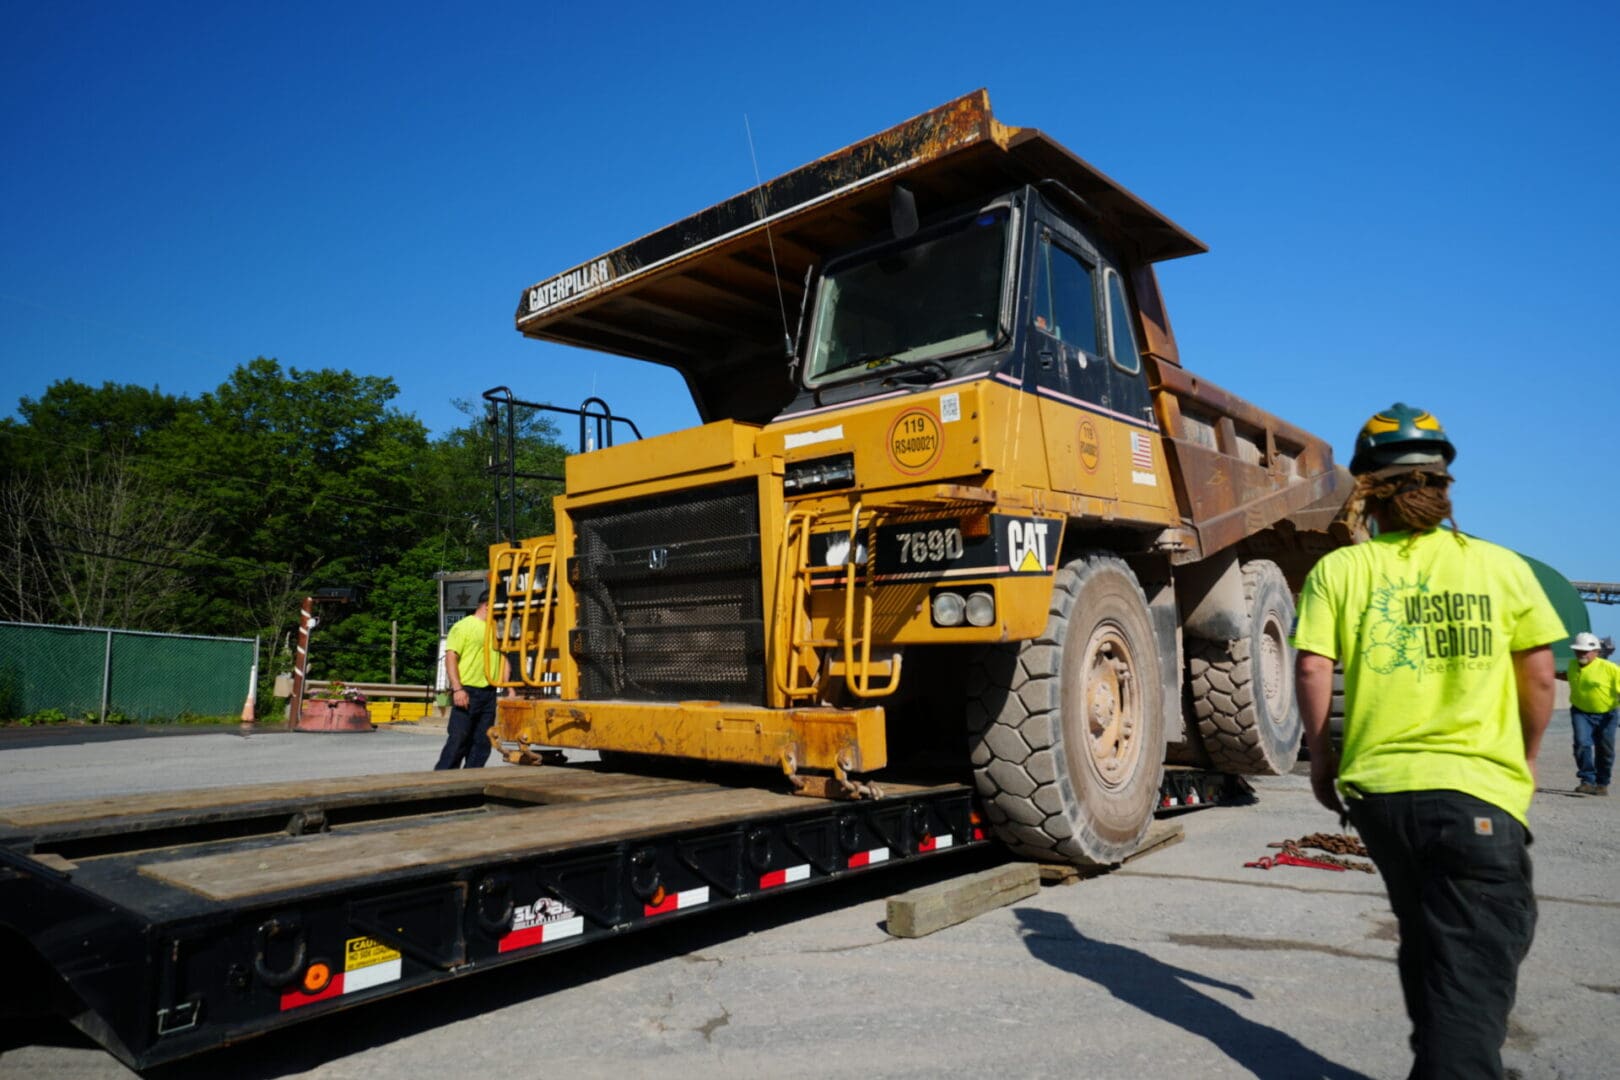 A yellow dump truck on a flatbed equipped with Metal Pless.